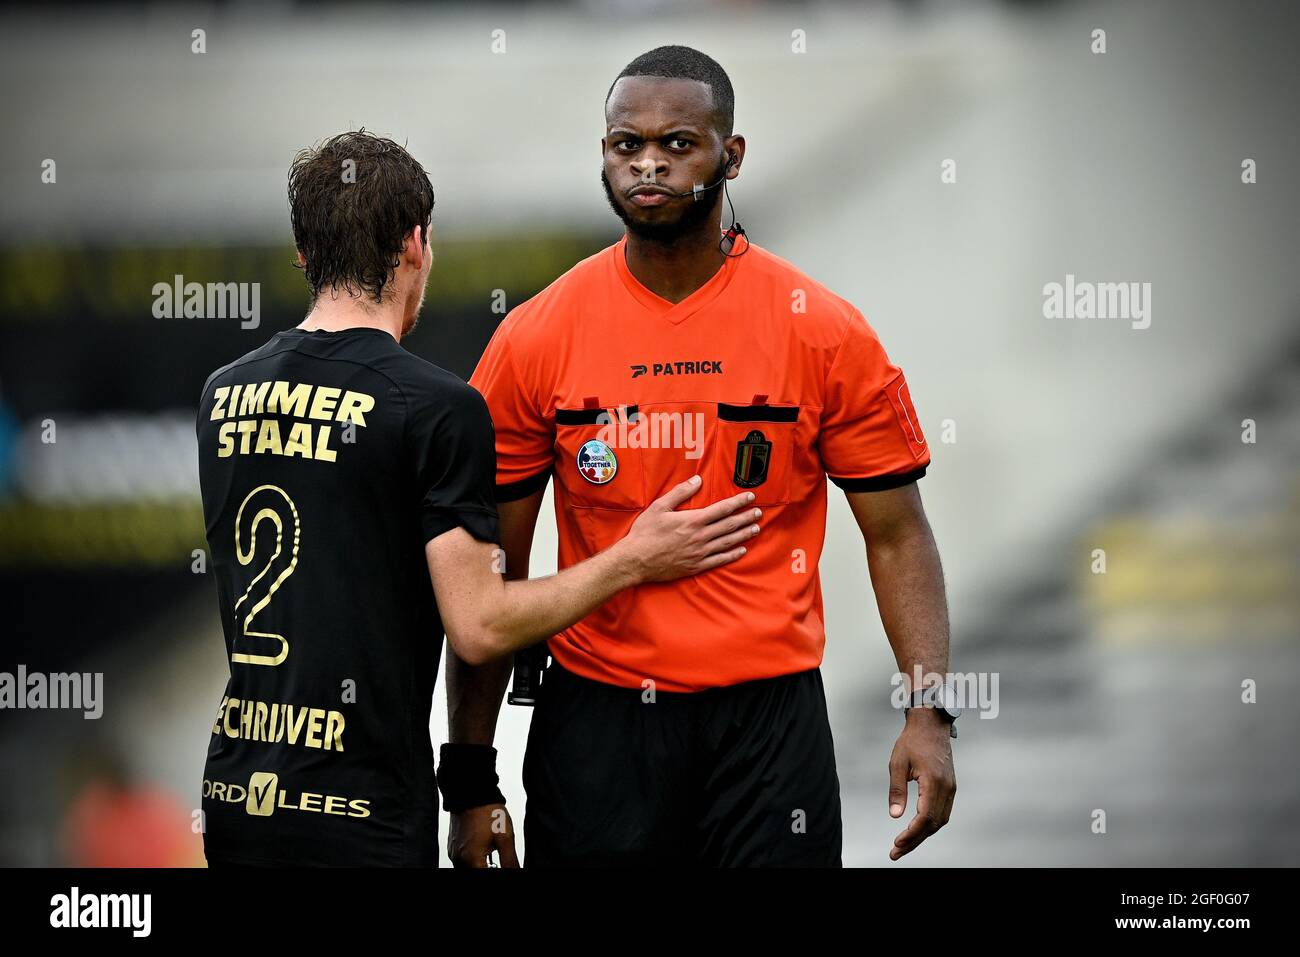 referee Marco Matonga Simonini pictured during a soccer match between Lierse Kempenzonen and RE Virton, Sunday 22 August 2021 in Lier, on day 2 of the Stock Photo